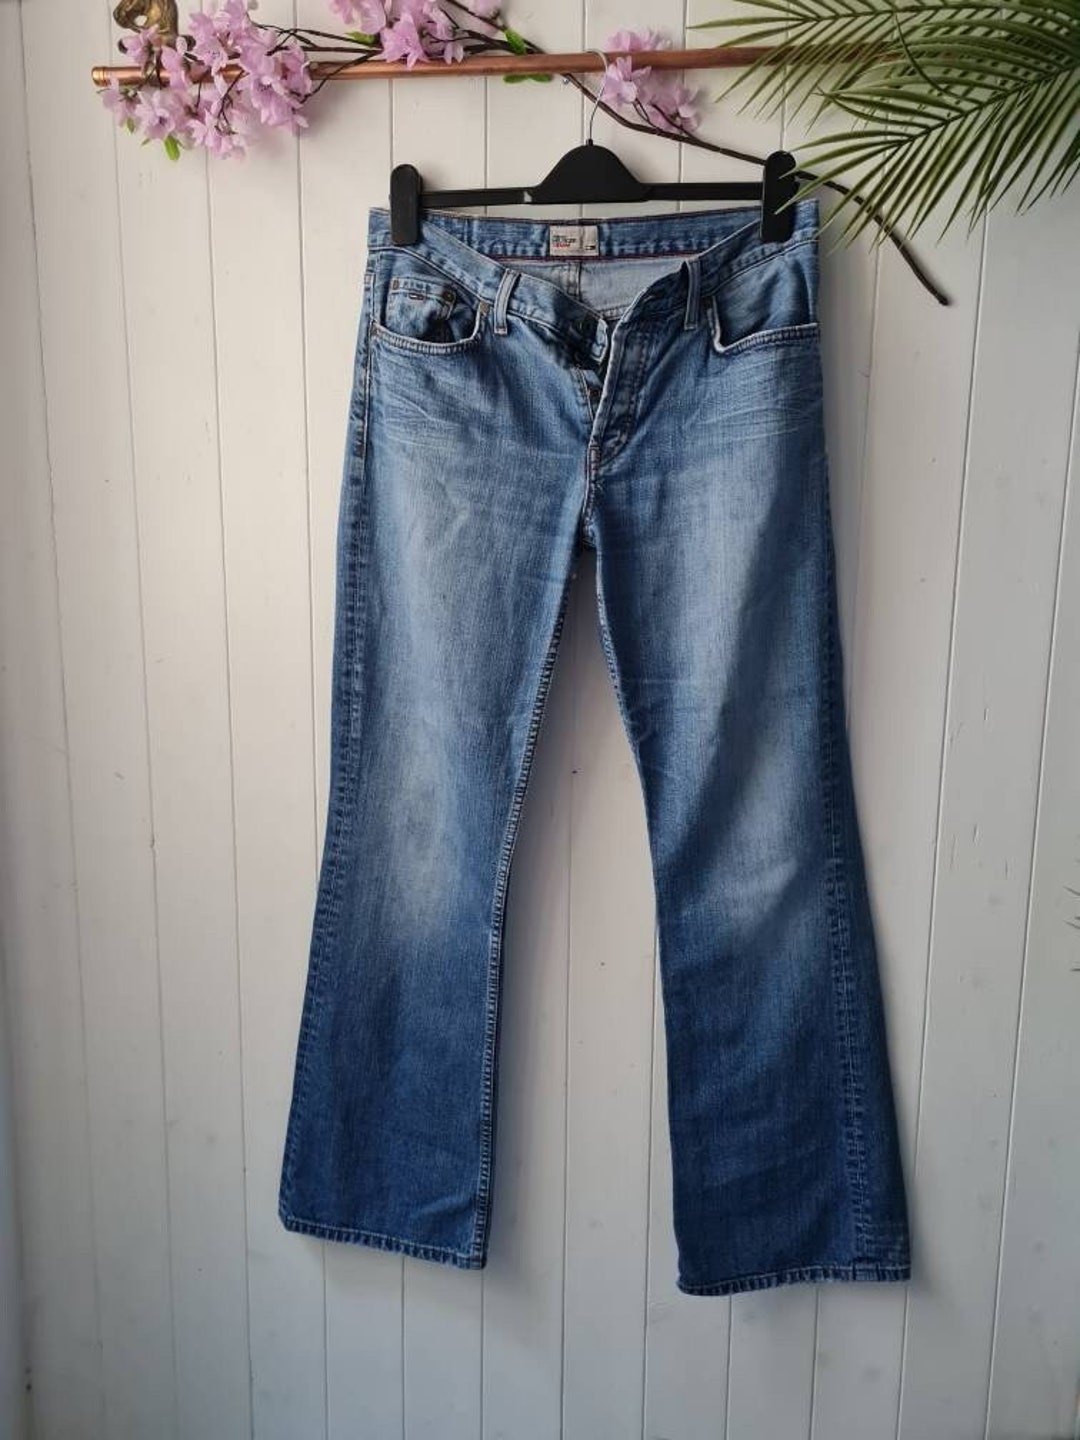 - Hippy, Jeans, Retro Etsy Boho Boot Stonewashed Jeans Cool Jeans, Hilfiger, Y2k Tommy Low Vintage Rise, Faded, Jeans, 90s Cut,